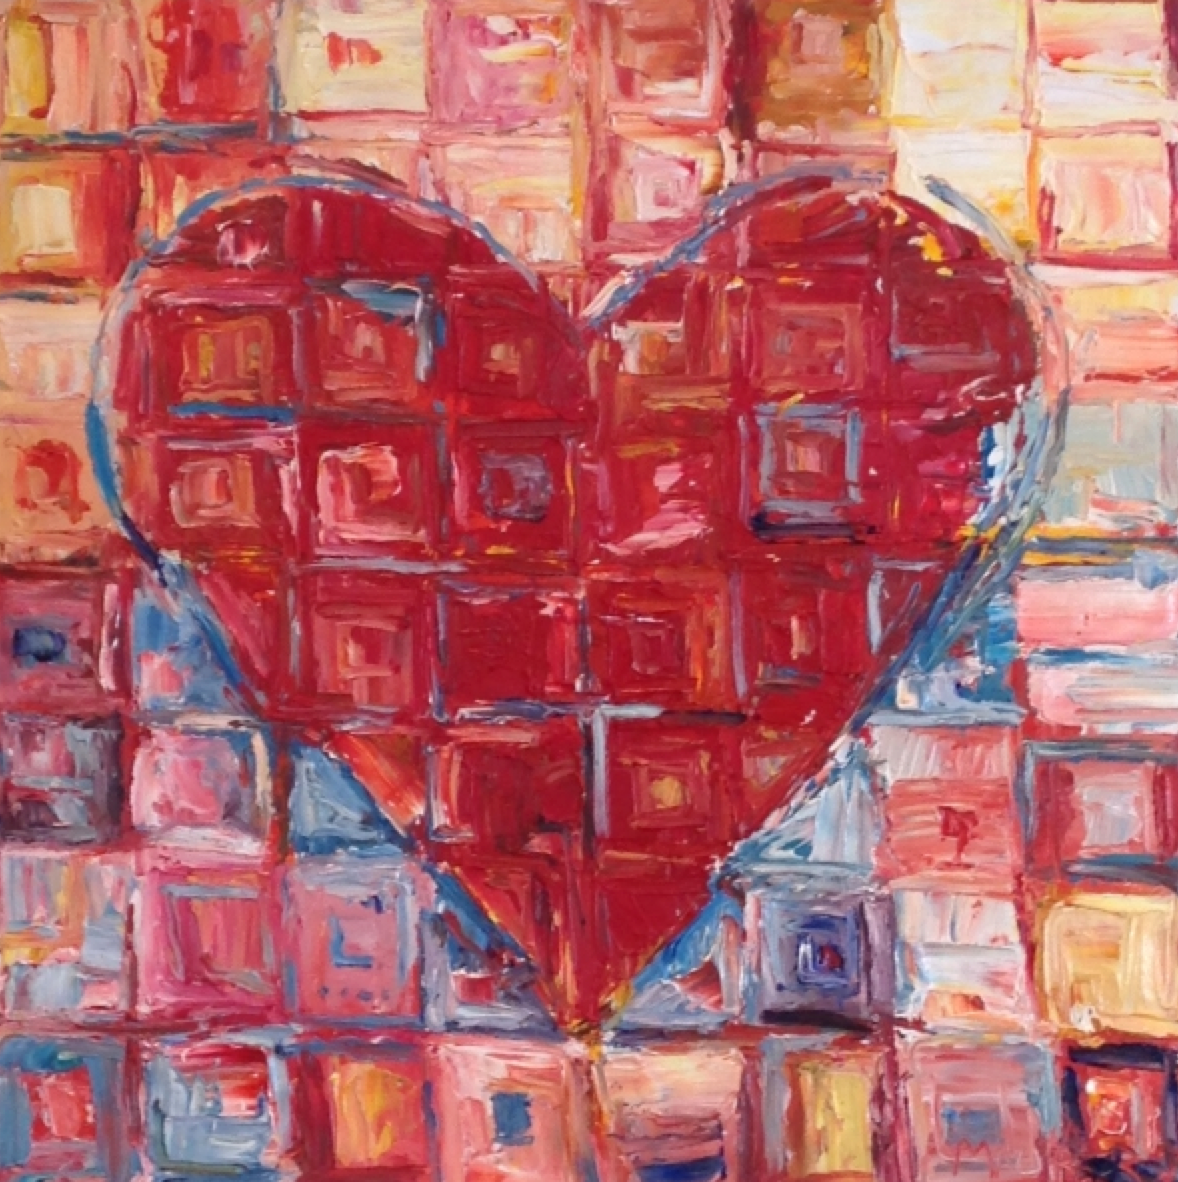  # 28  Art=Love  by Jodie Maurer  24" x 24" | Oil | $1,600.00     Status: Available  Current Location:  C. Parker Gallery  